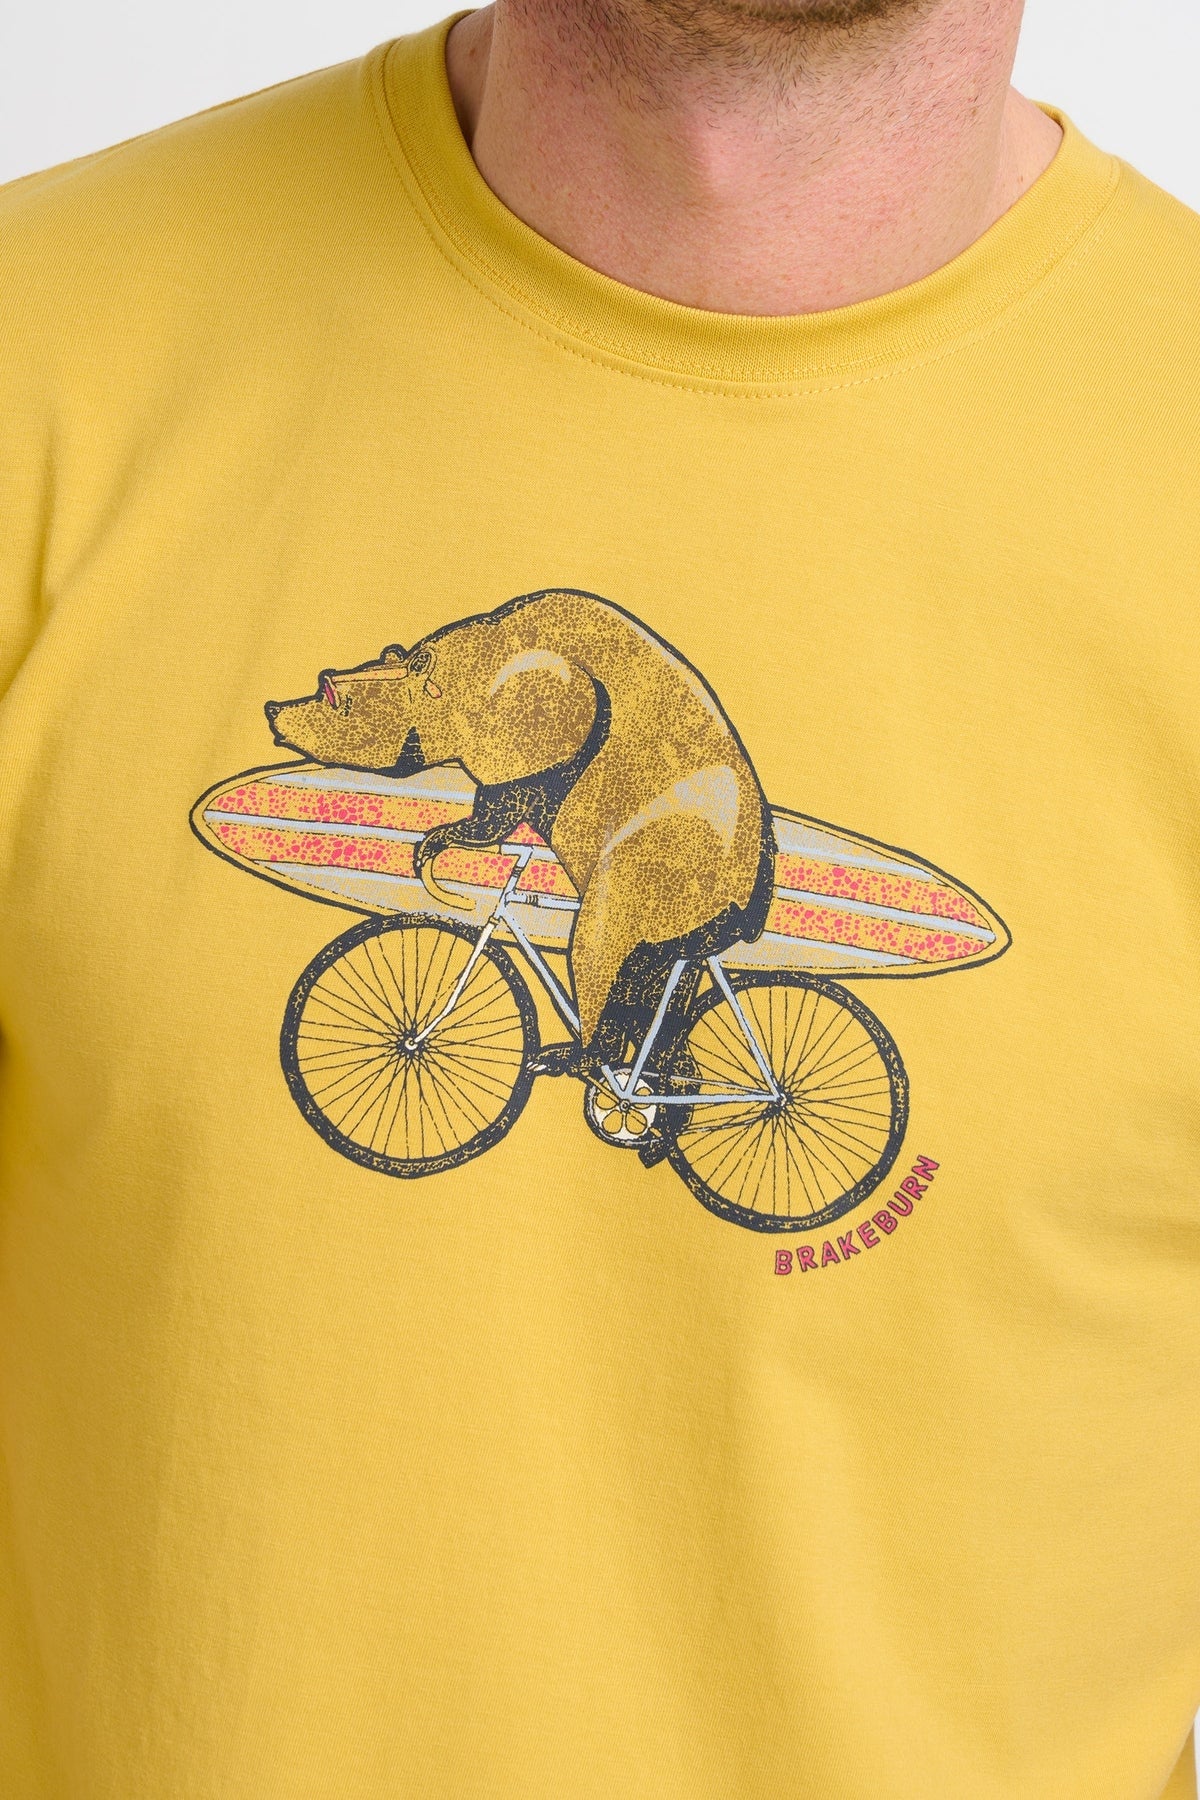 Men's tee of a print of a bear on a bicycle with a surfboard